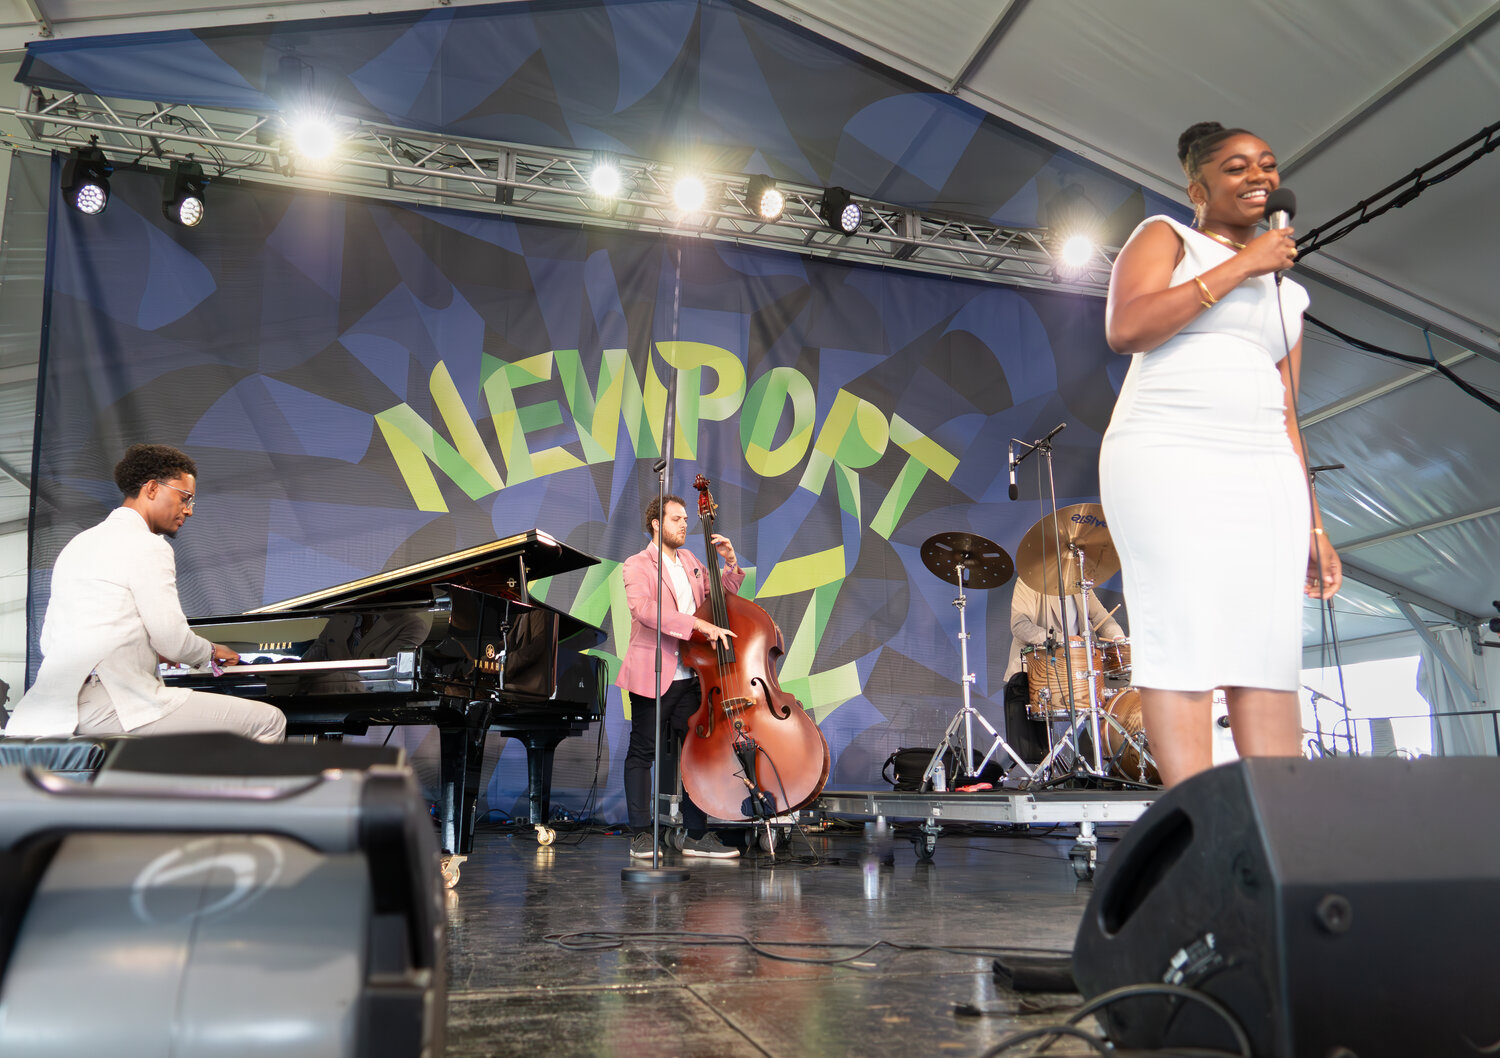 Samara Joy performs with her band on the Quad stage at the world-renowned Newport Jazz Festival on August 6. This is Samara's second appearance at the Festival.